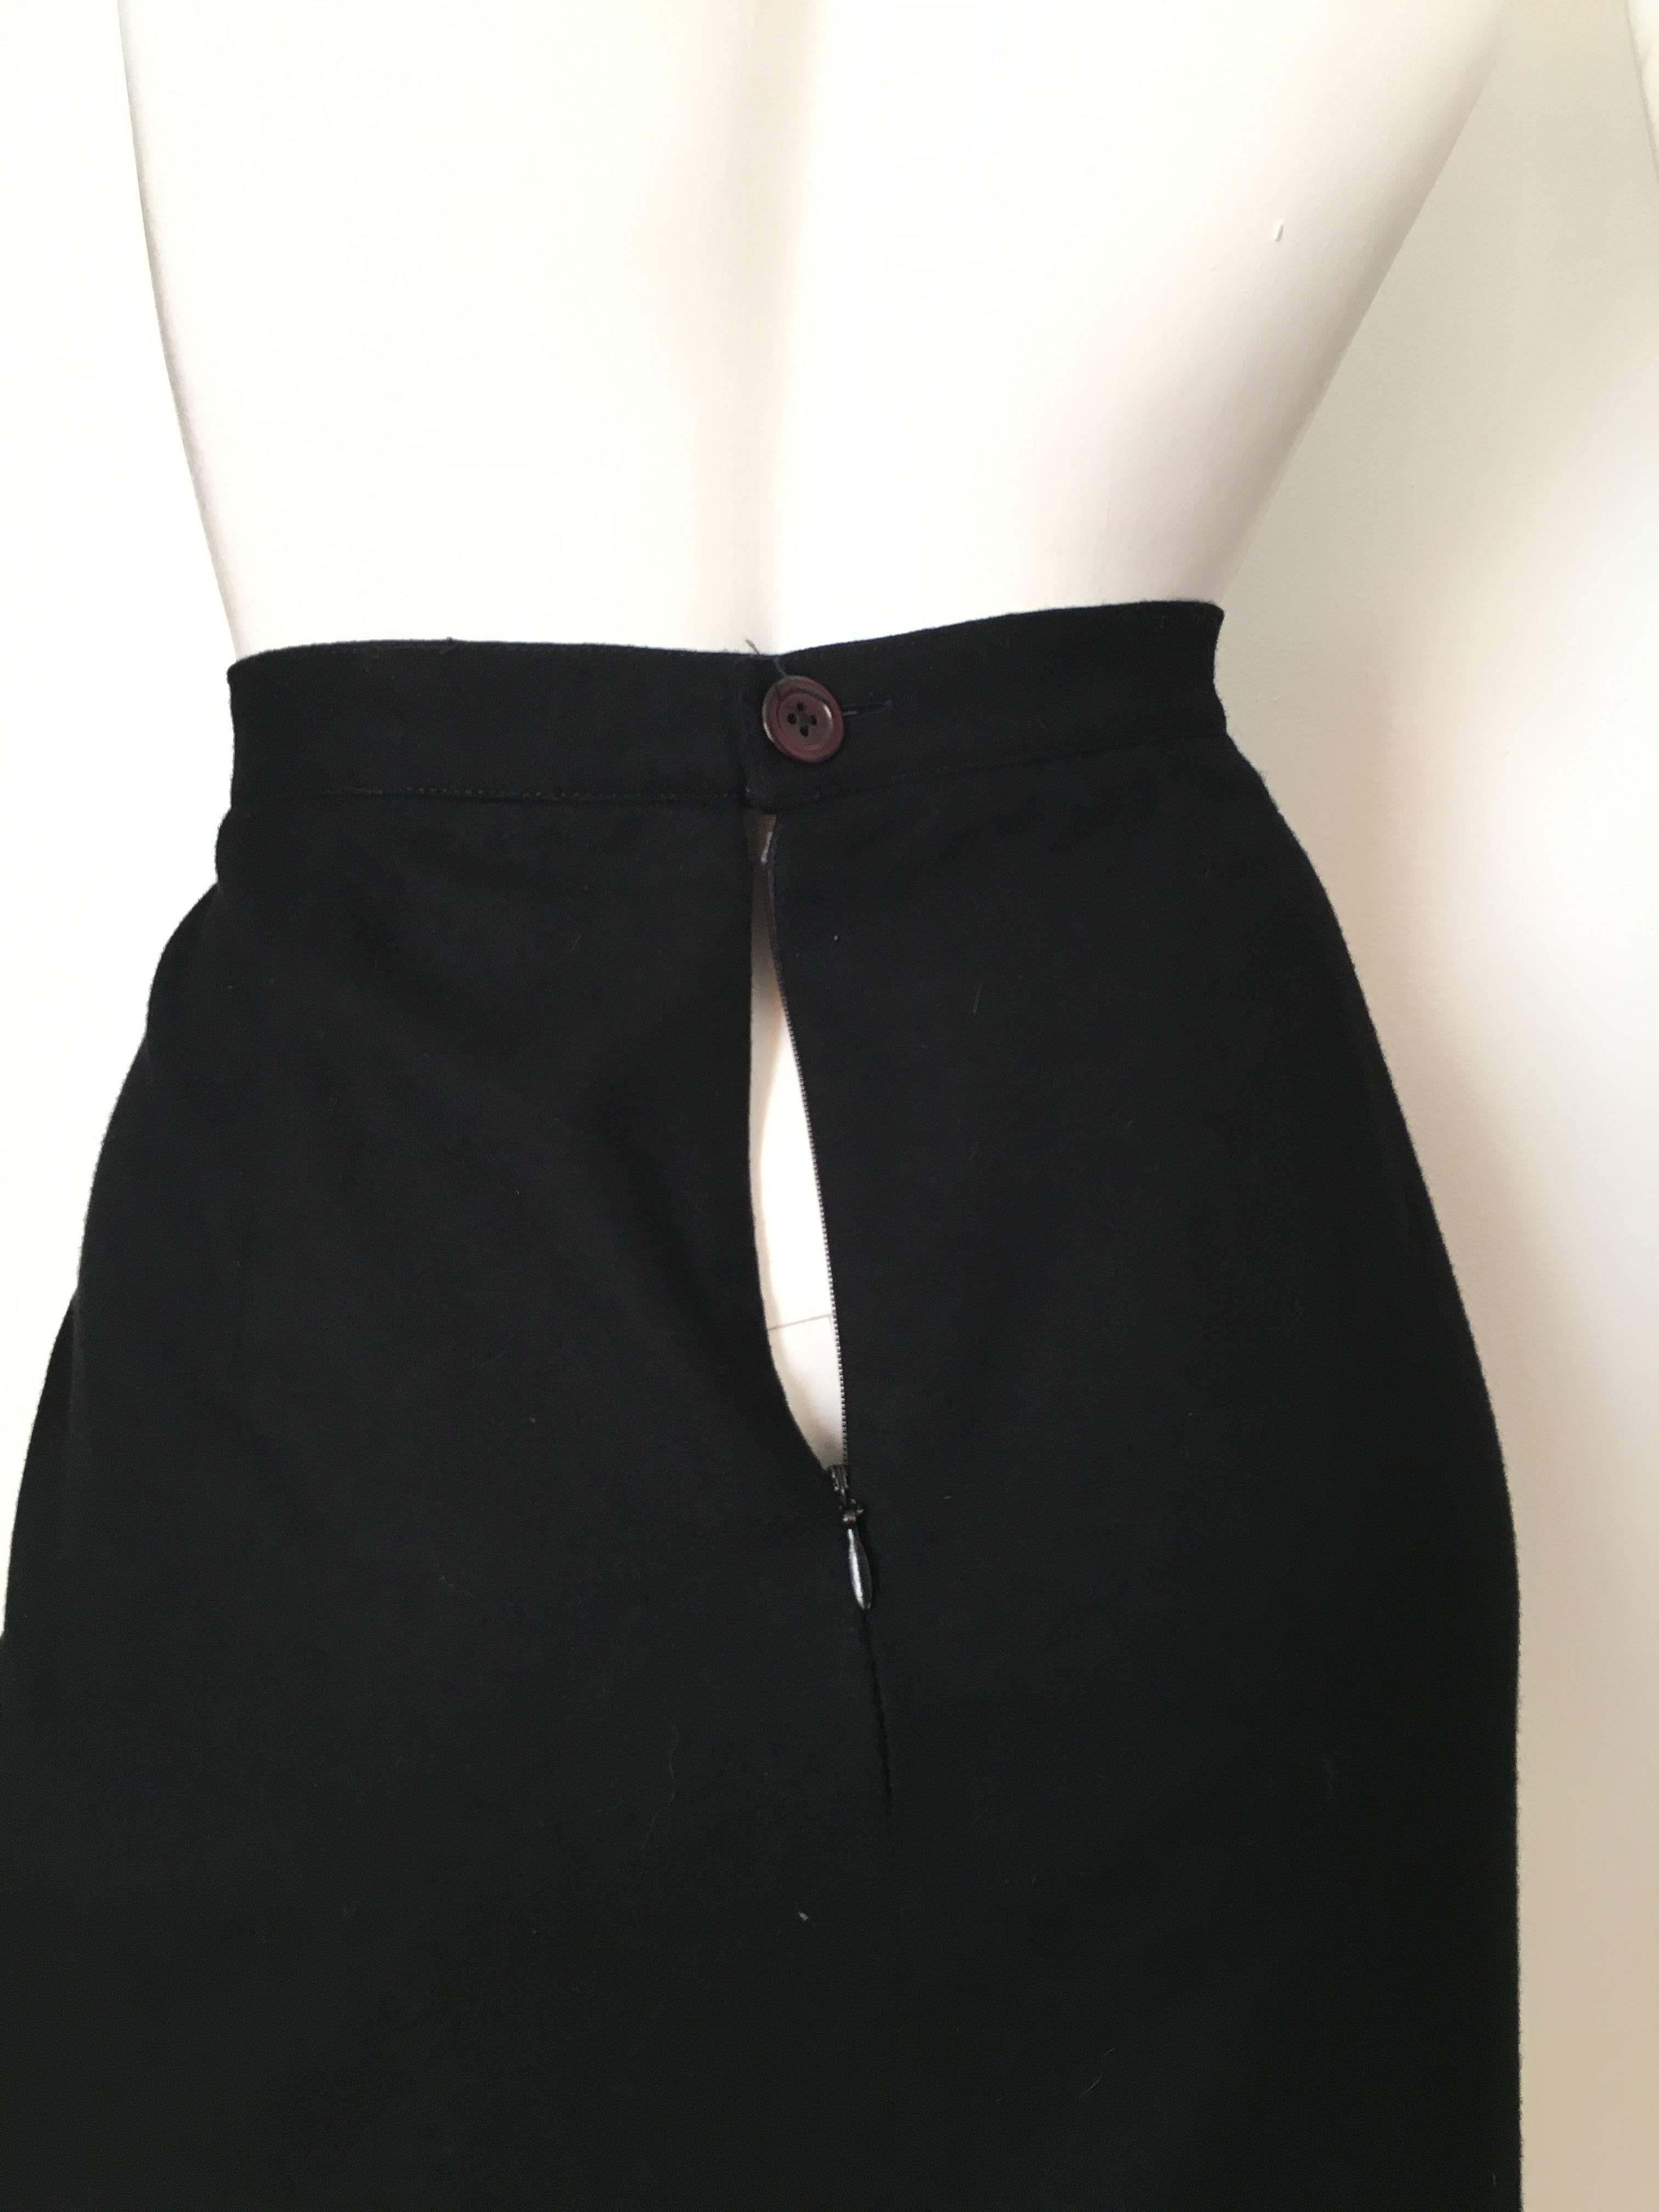 Karl Lagerfeld for Neiman Marcus 1980s Black Wool Cashmere Pencil Skirt Size 6. For Sale 1